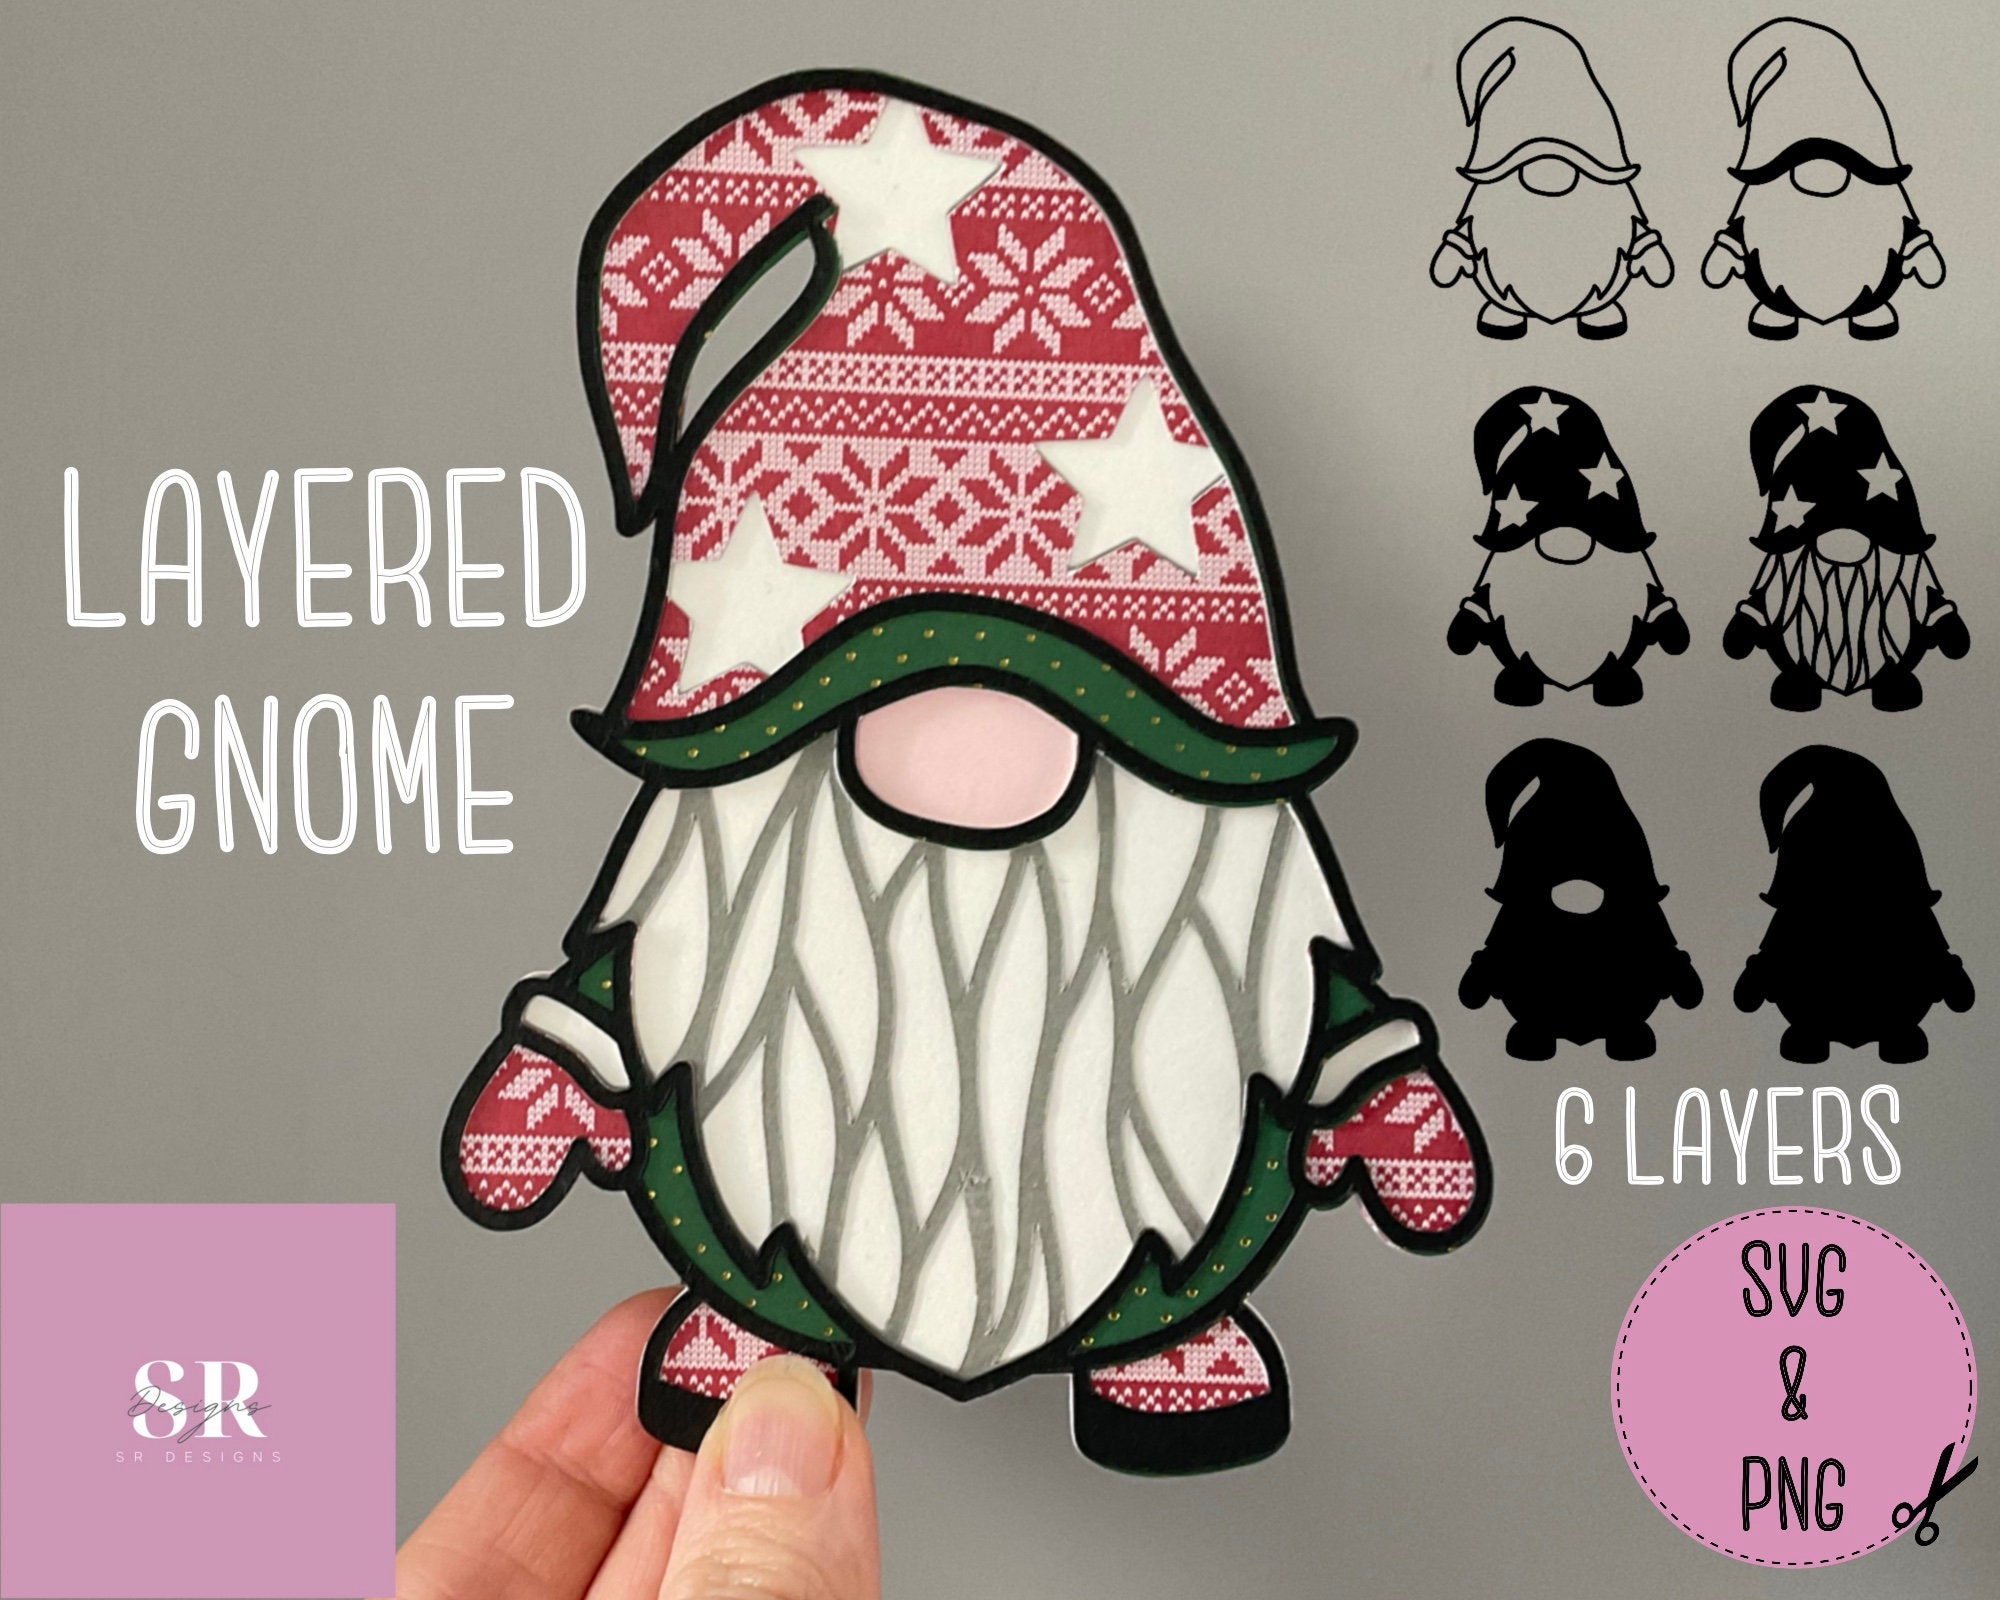 Svg Layered Gnome Cut File 3d Gonk Svg Layered Gnome Svg Etsy